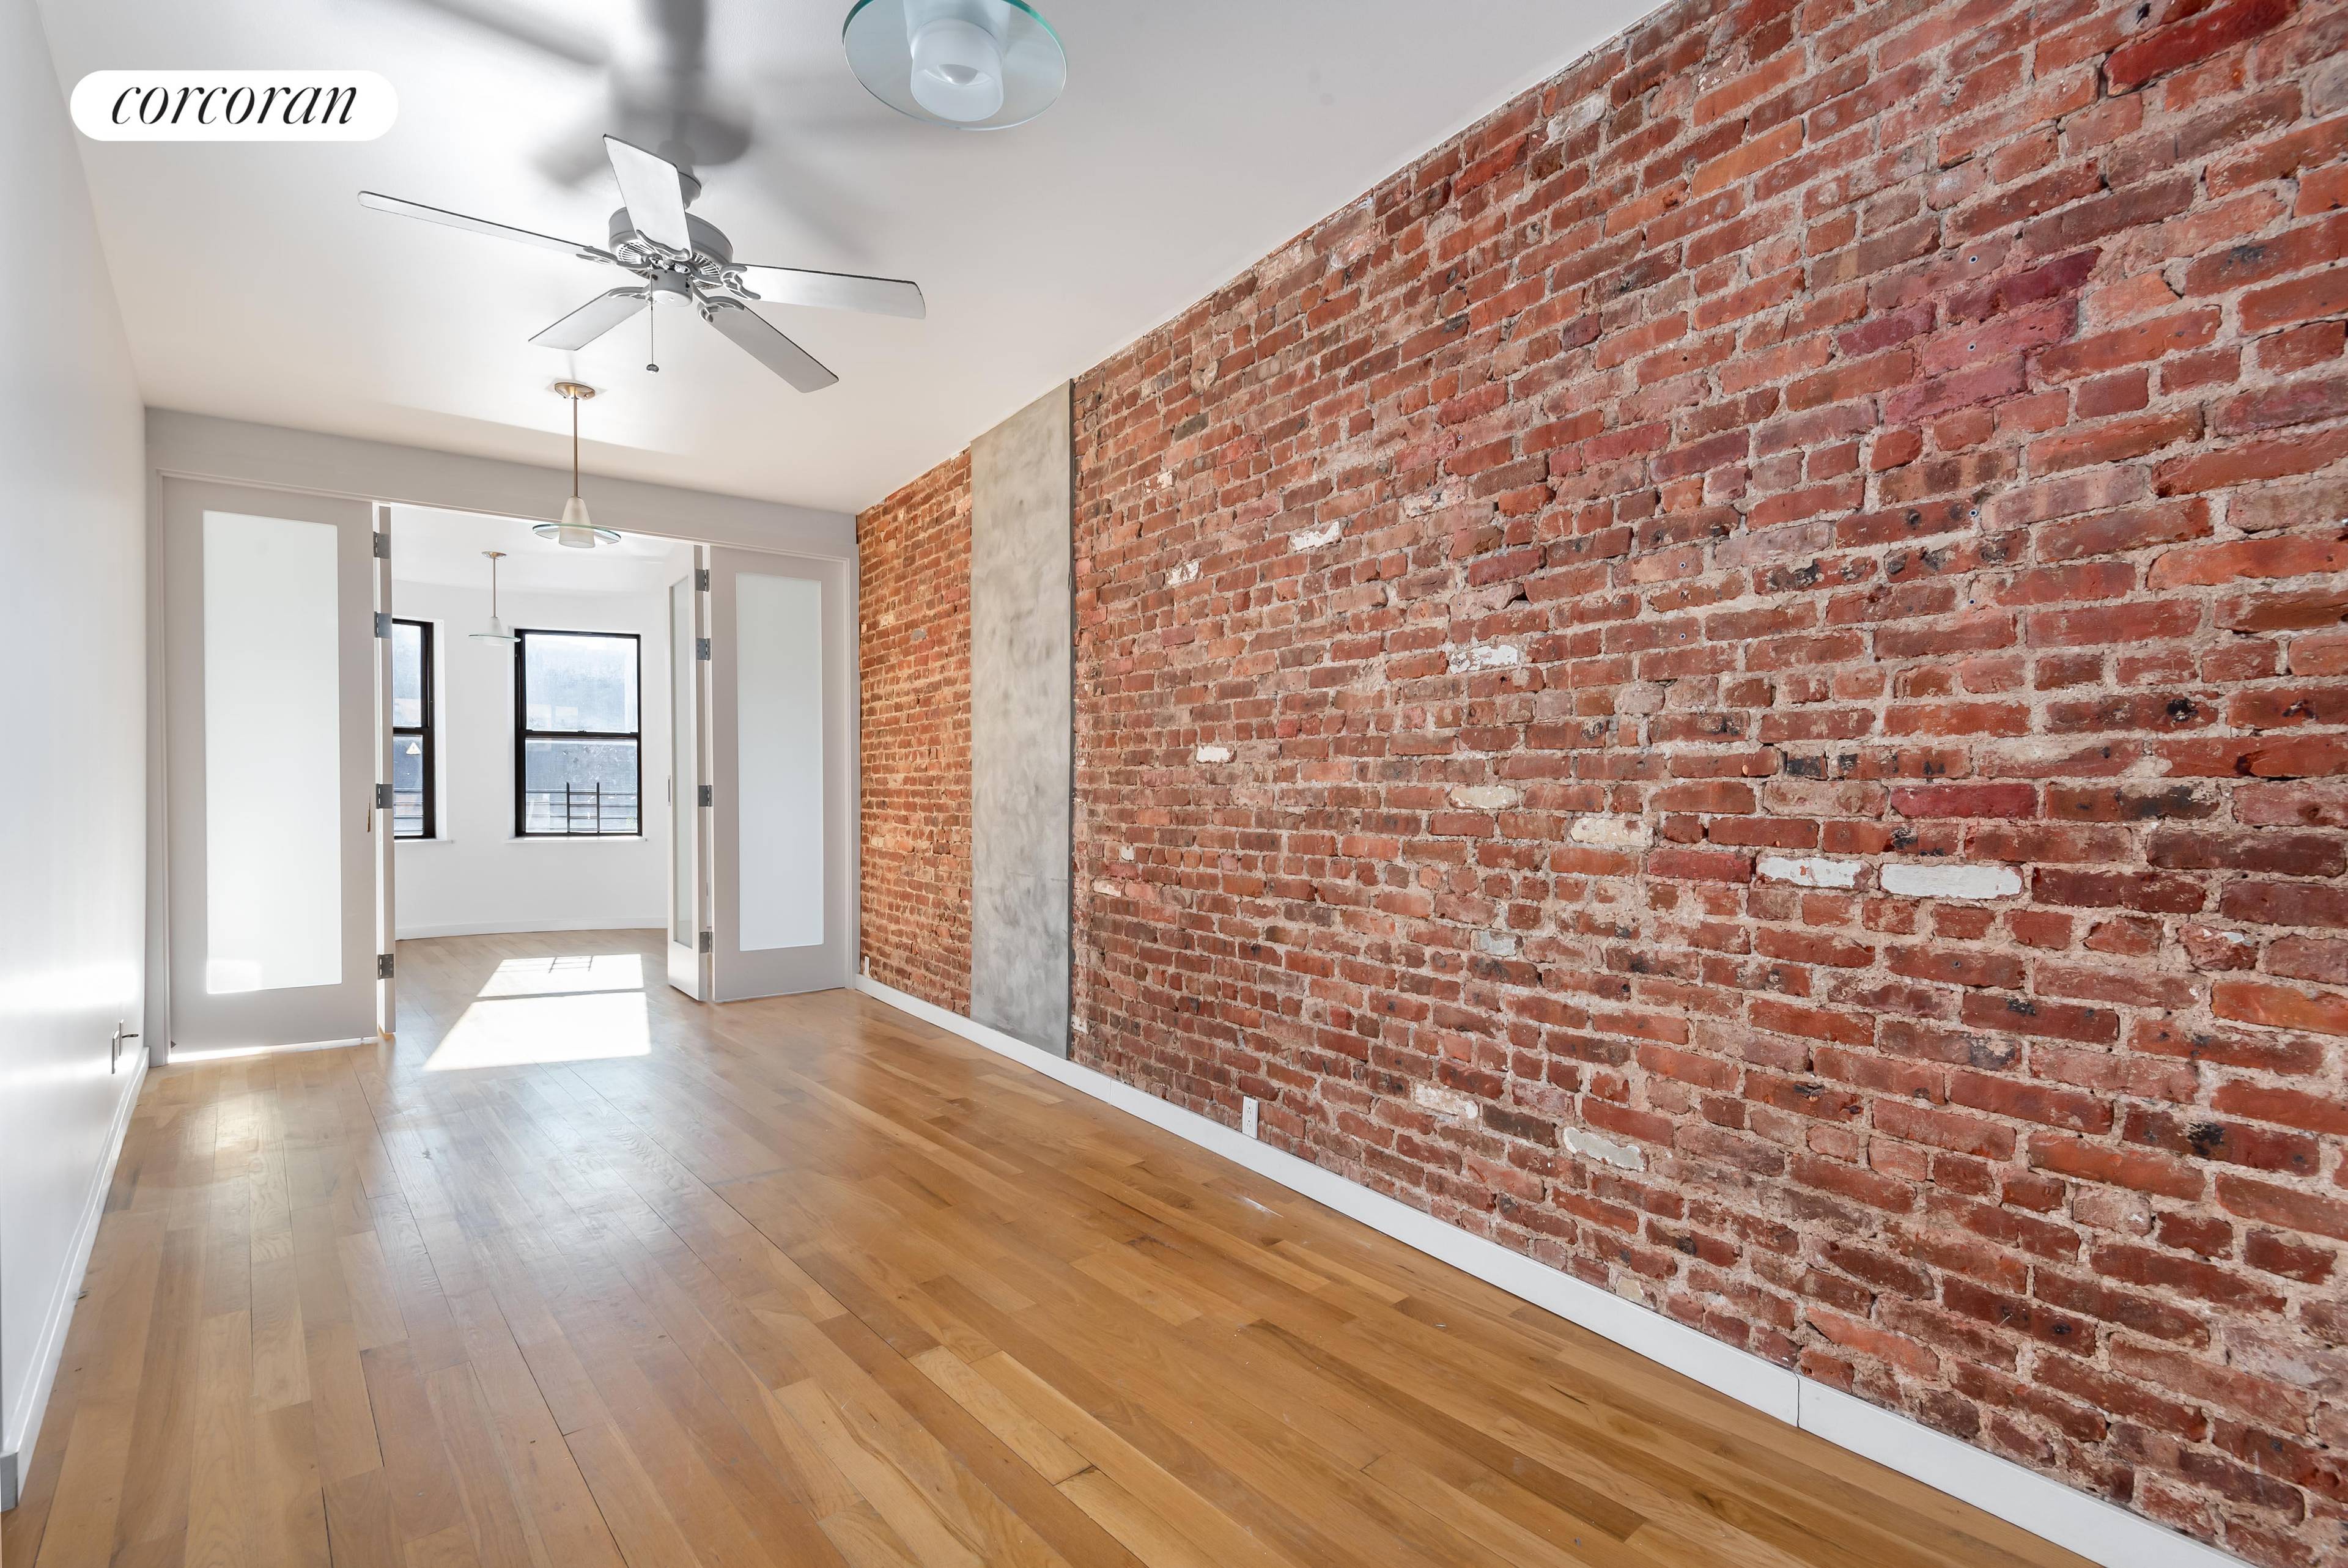 New to the market ! This large 1100 sq ft and super high ceiling over 11 ft, 2 bedroom 2 bath masterpiece is in a convenient location in South Slope.